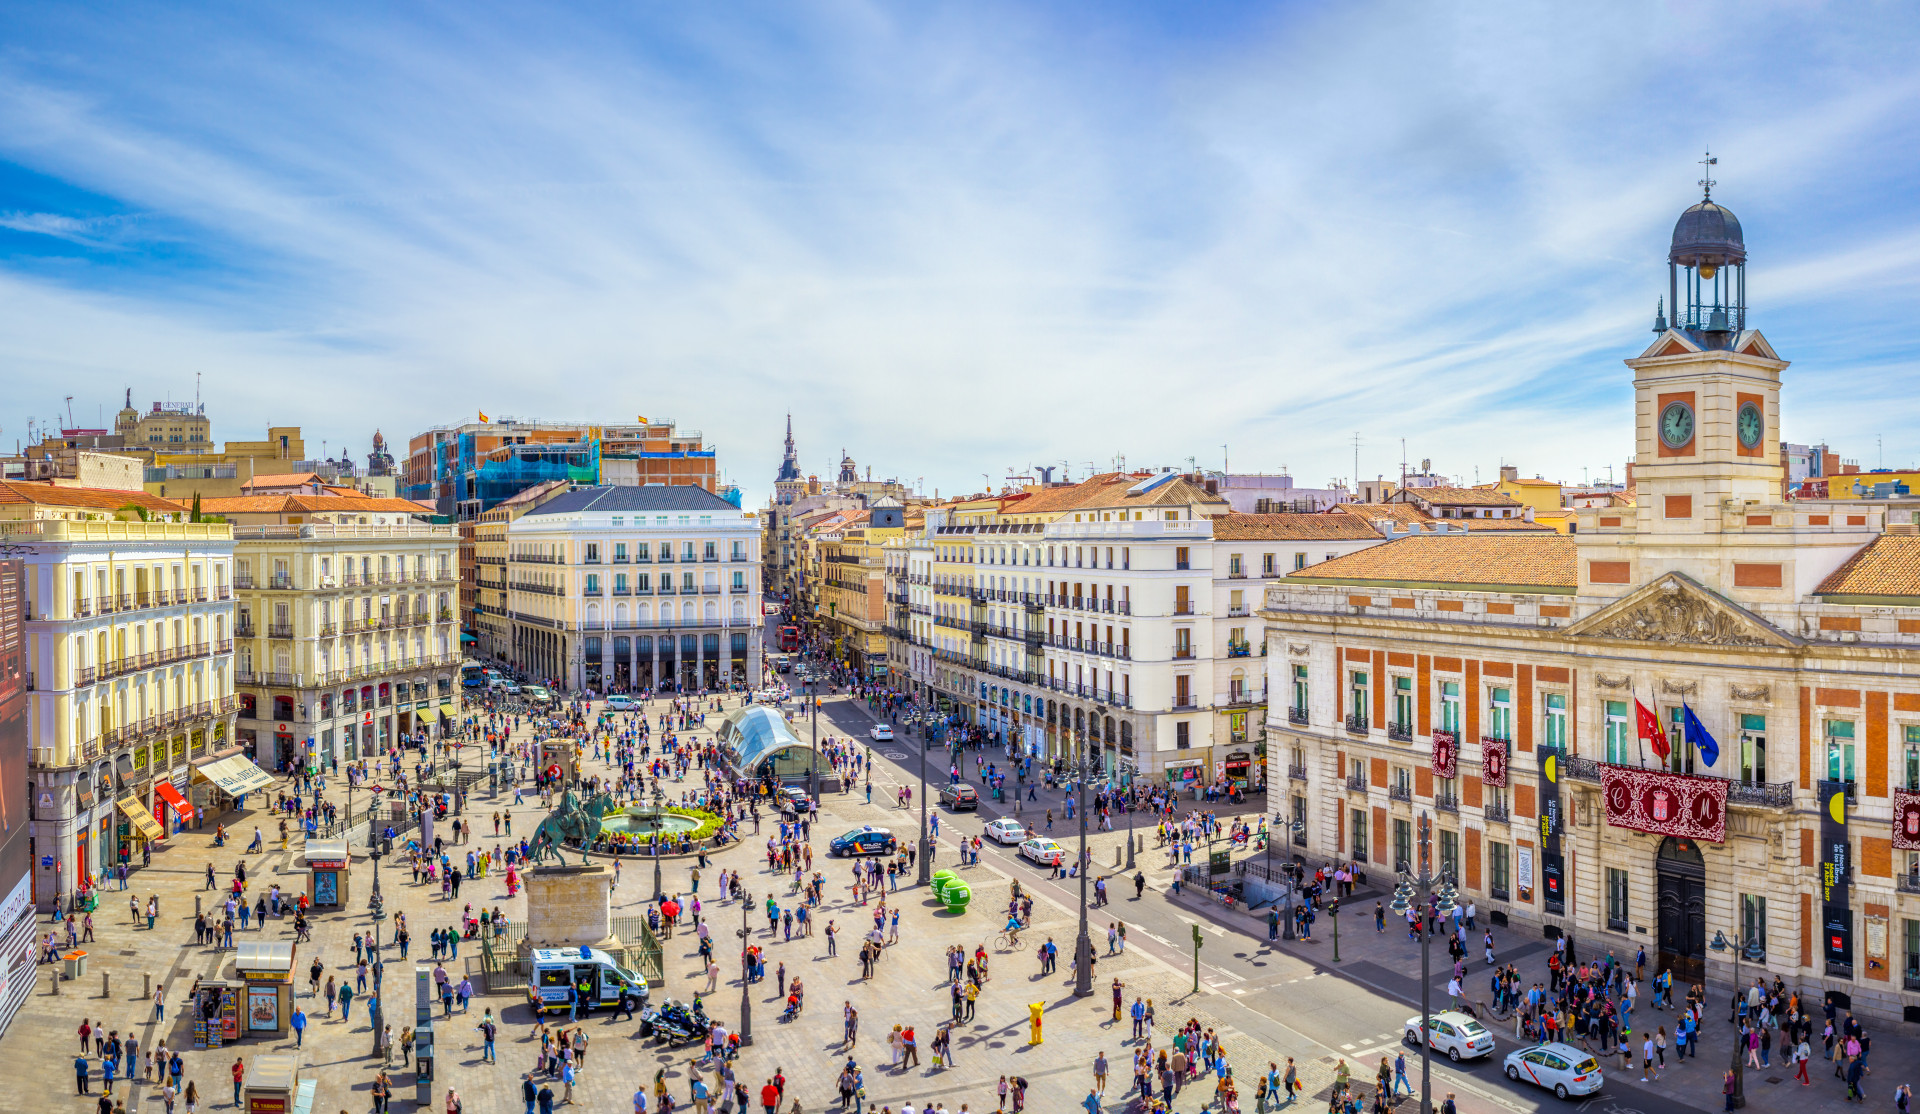 You can still admire the traditional architecture of the city, but Madrid is now the third-biggest city in the European Union and a hub of culture, fashion, and entertainment.<p>You may also like:<a href="https://www.starsinsider.com/n/472724?utm_source=msn.com&utm_medium=display&utm_campaign=referral_description&utm_content=292997v1en-us"> Celebrity parents who hide their kids from the public eye </a></p>